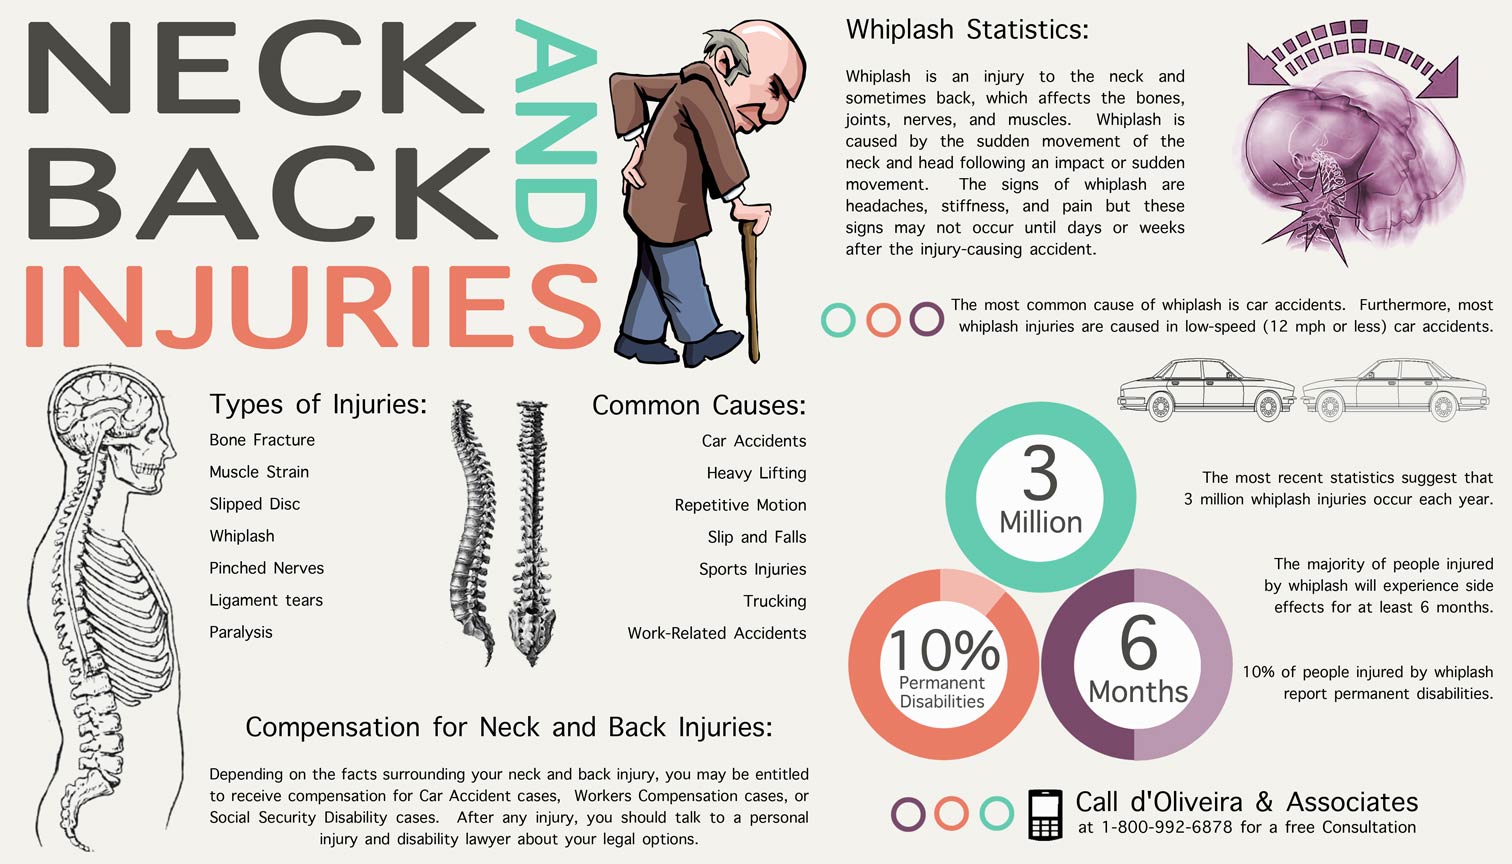 Back and Neck Injuries from Auto Accidents Infographic Common Causes, Types of Injuries, Whiplash Statistics